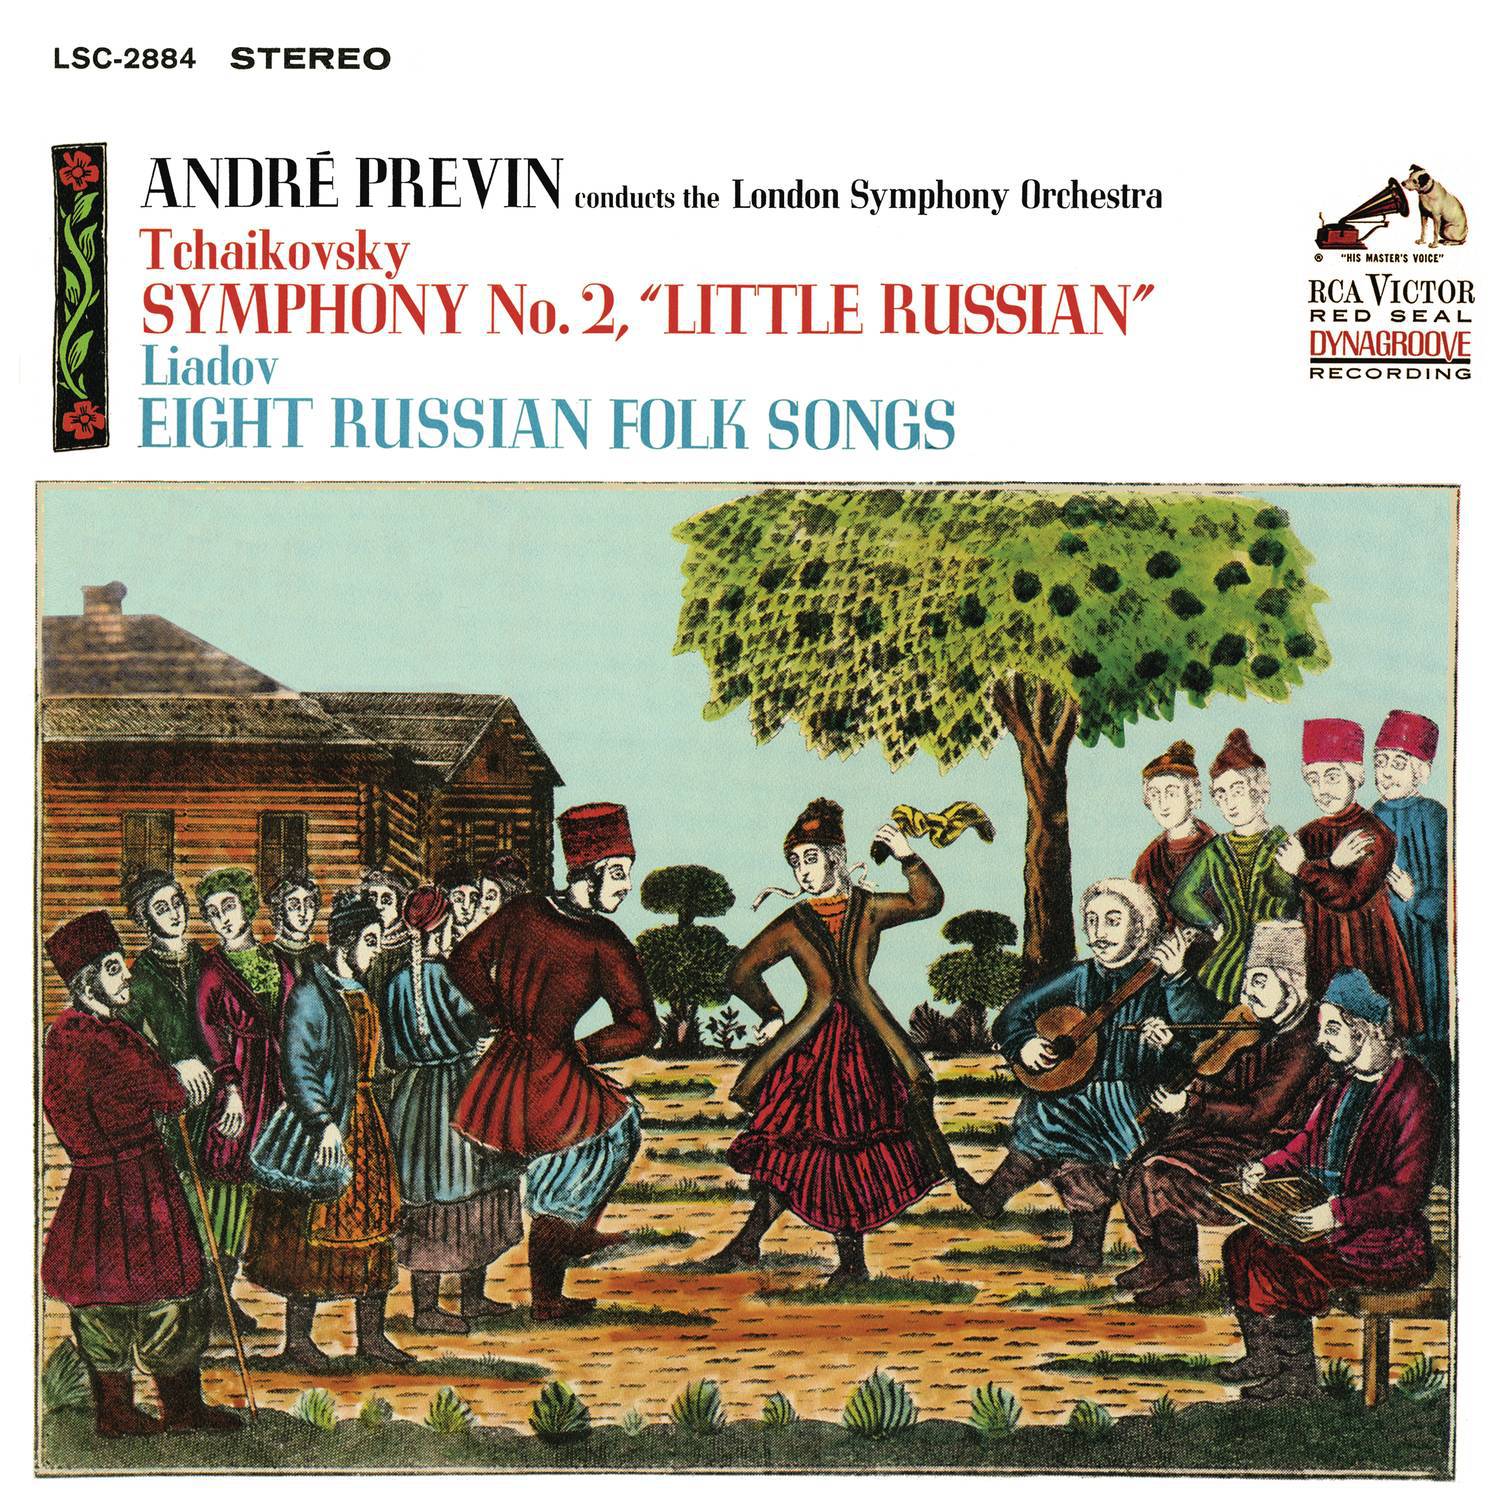 Russian Folk Songs for Orchestra, Op. 58:I Danced with a Mosquito